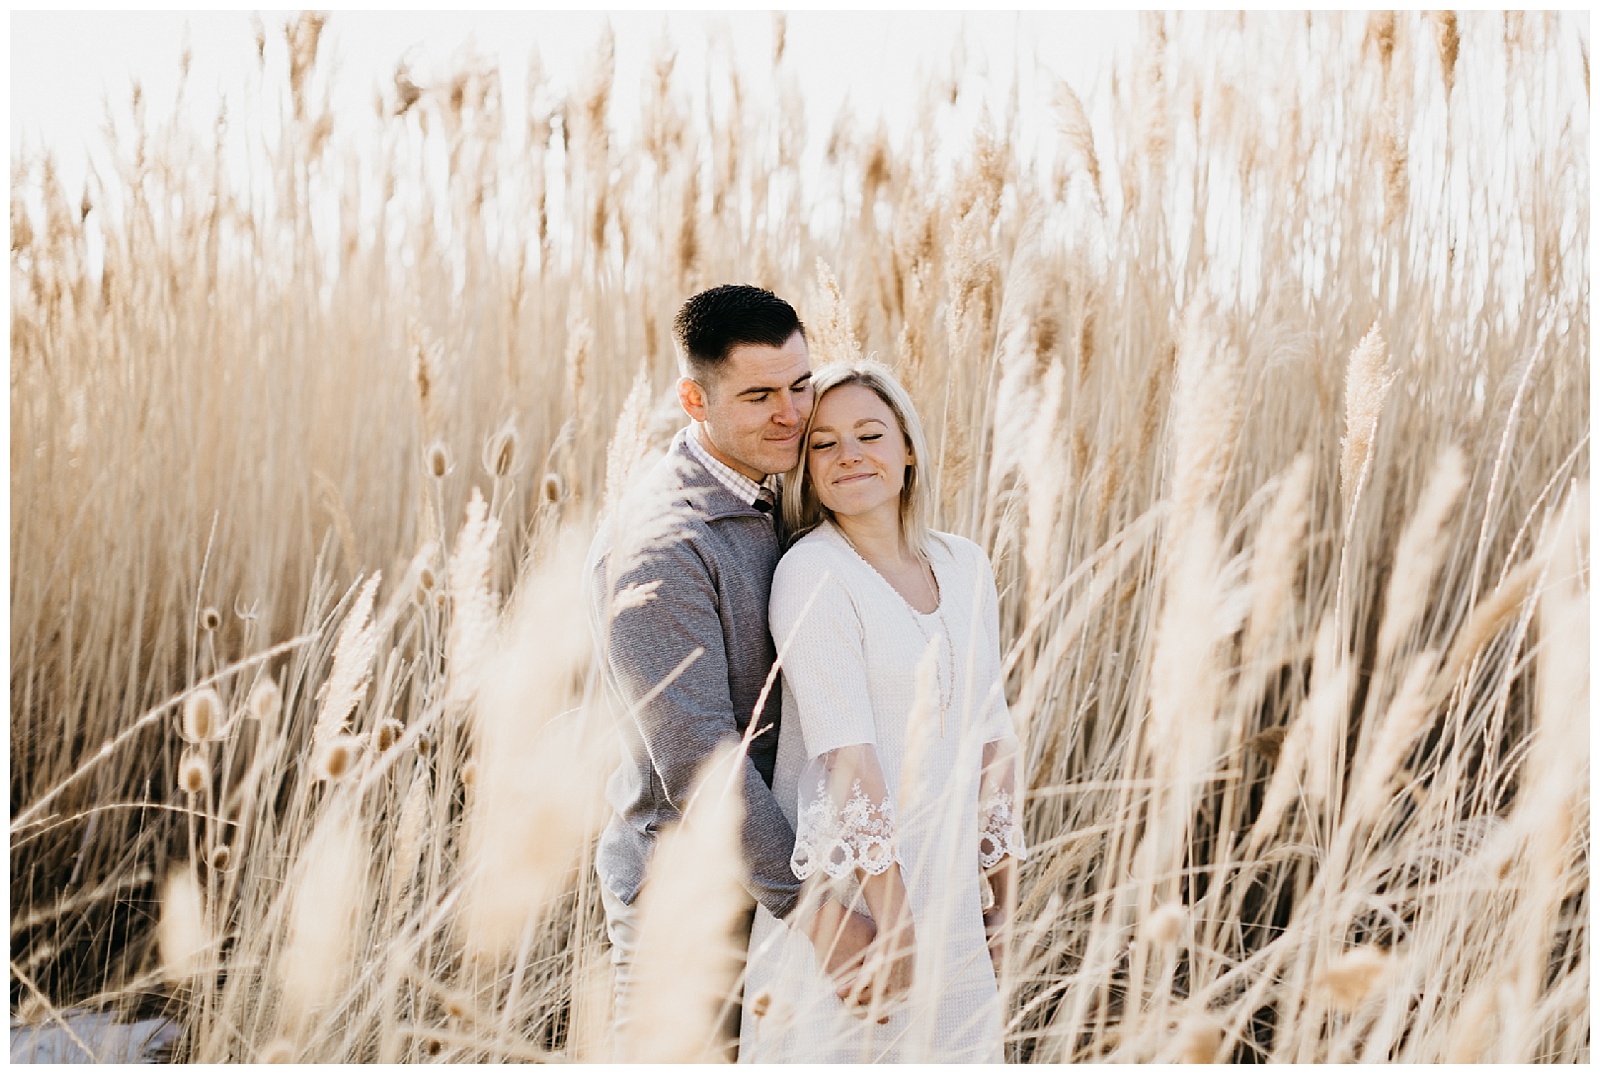 Hannah and John, Winter Engagements at Tunnel Springs Park - Nicole Aston  Photo